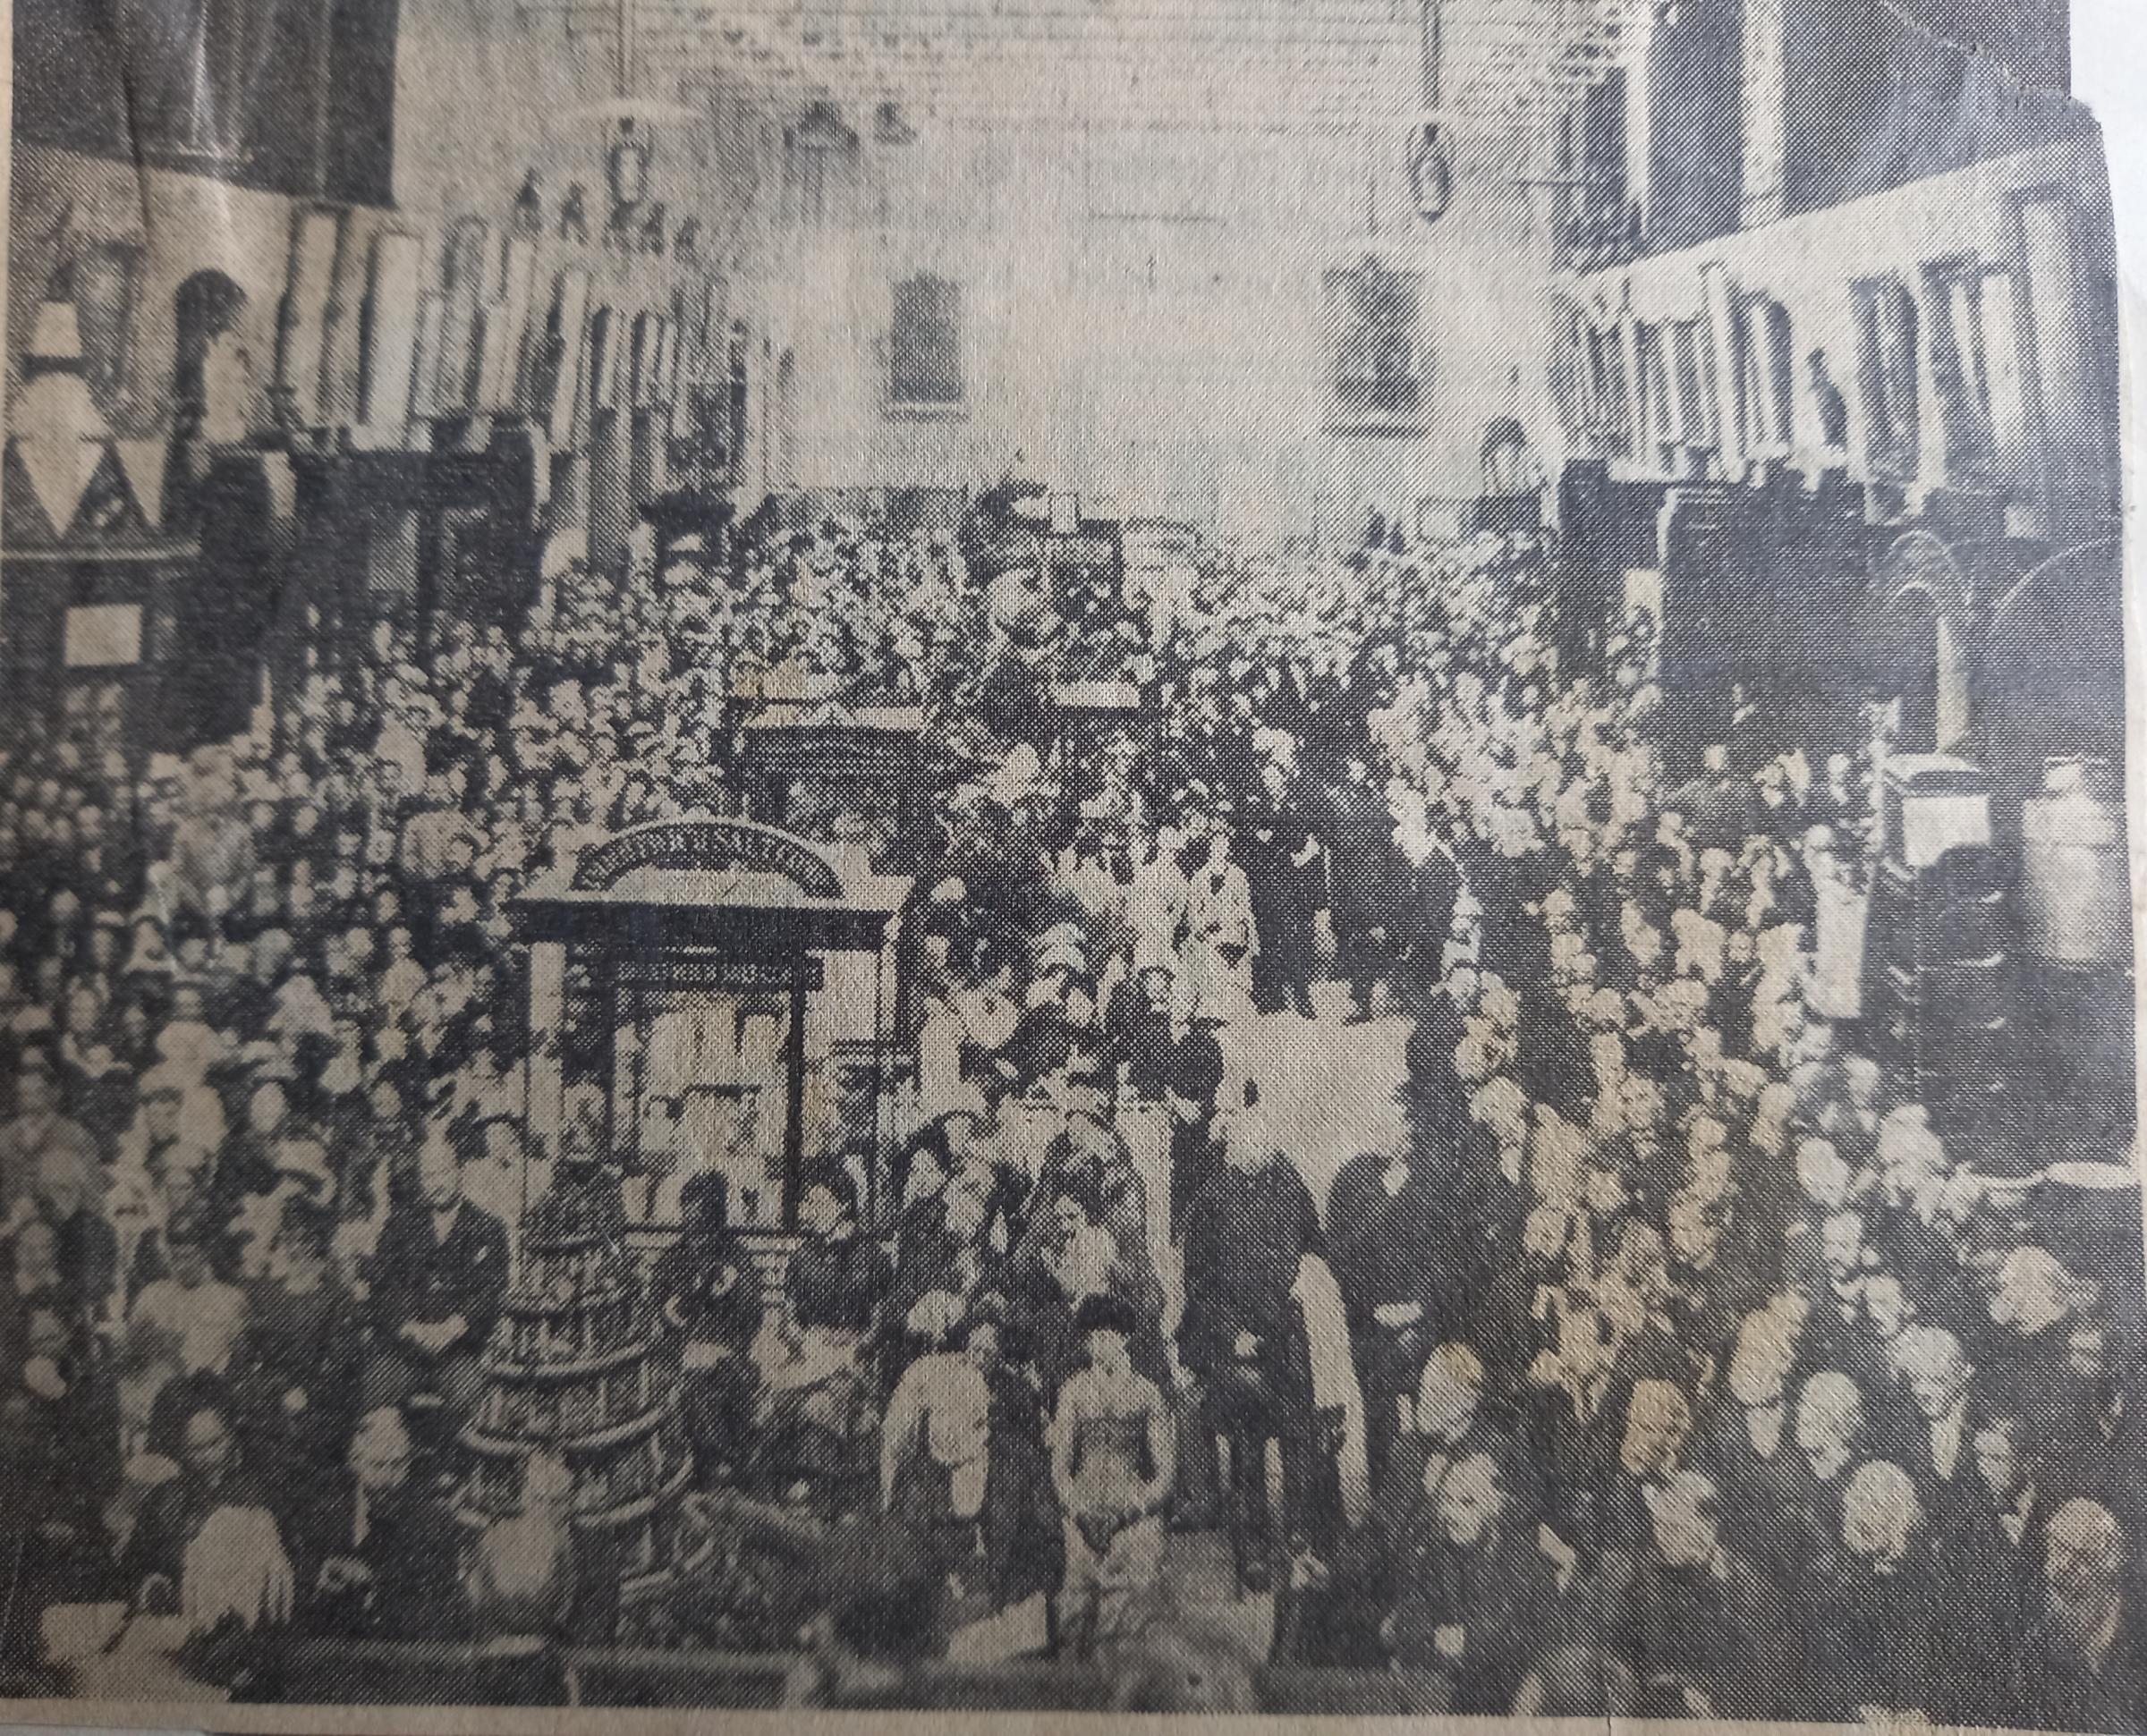 The audience at the closing ceremony of the exhibition on October 18, 1882. Showcases of Royal Worcester porcelain can be seen alongside the wall